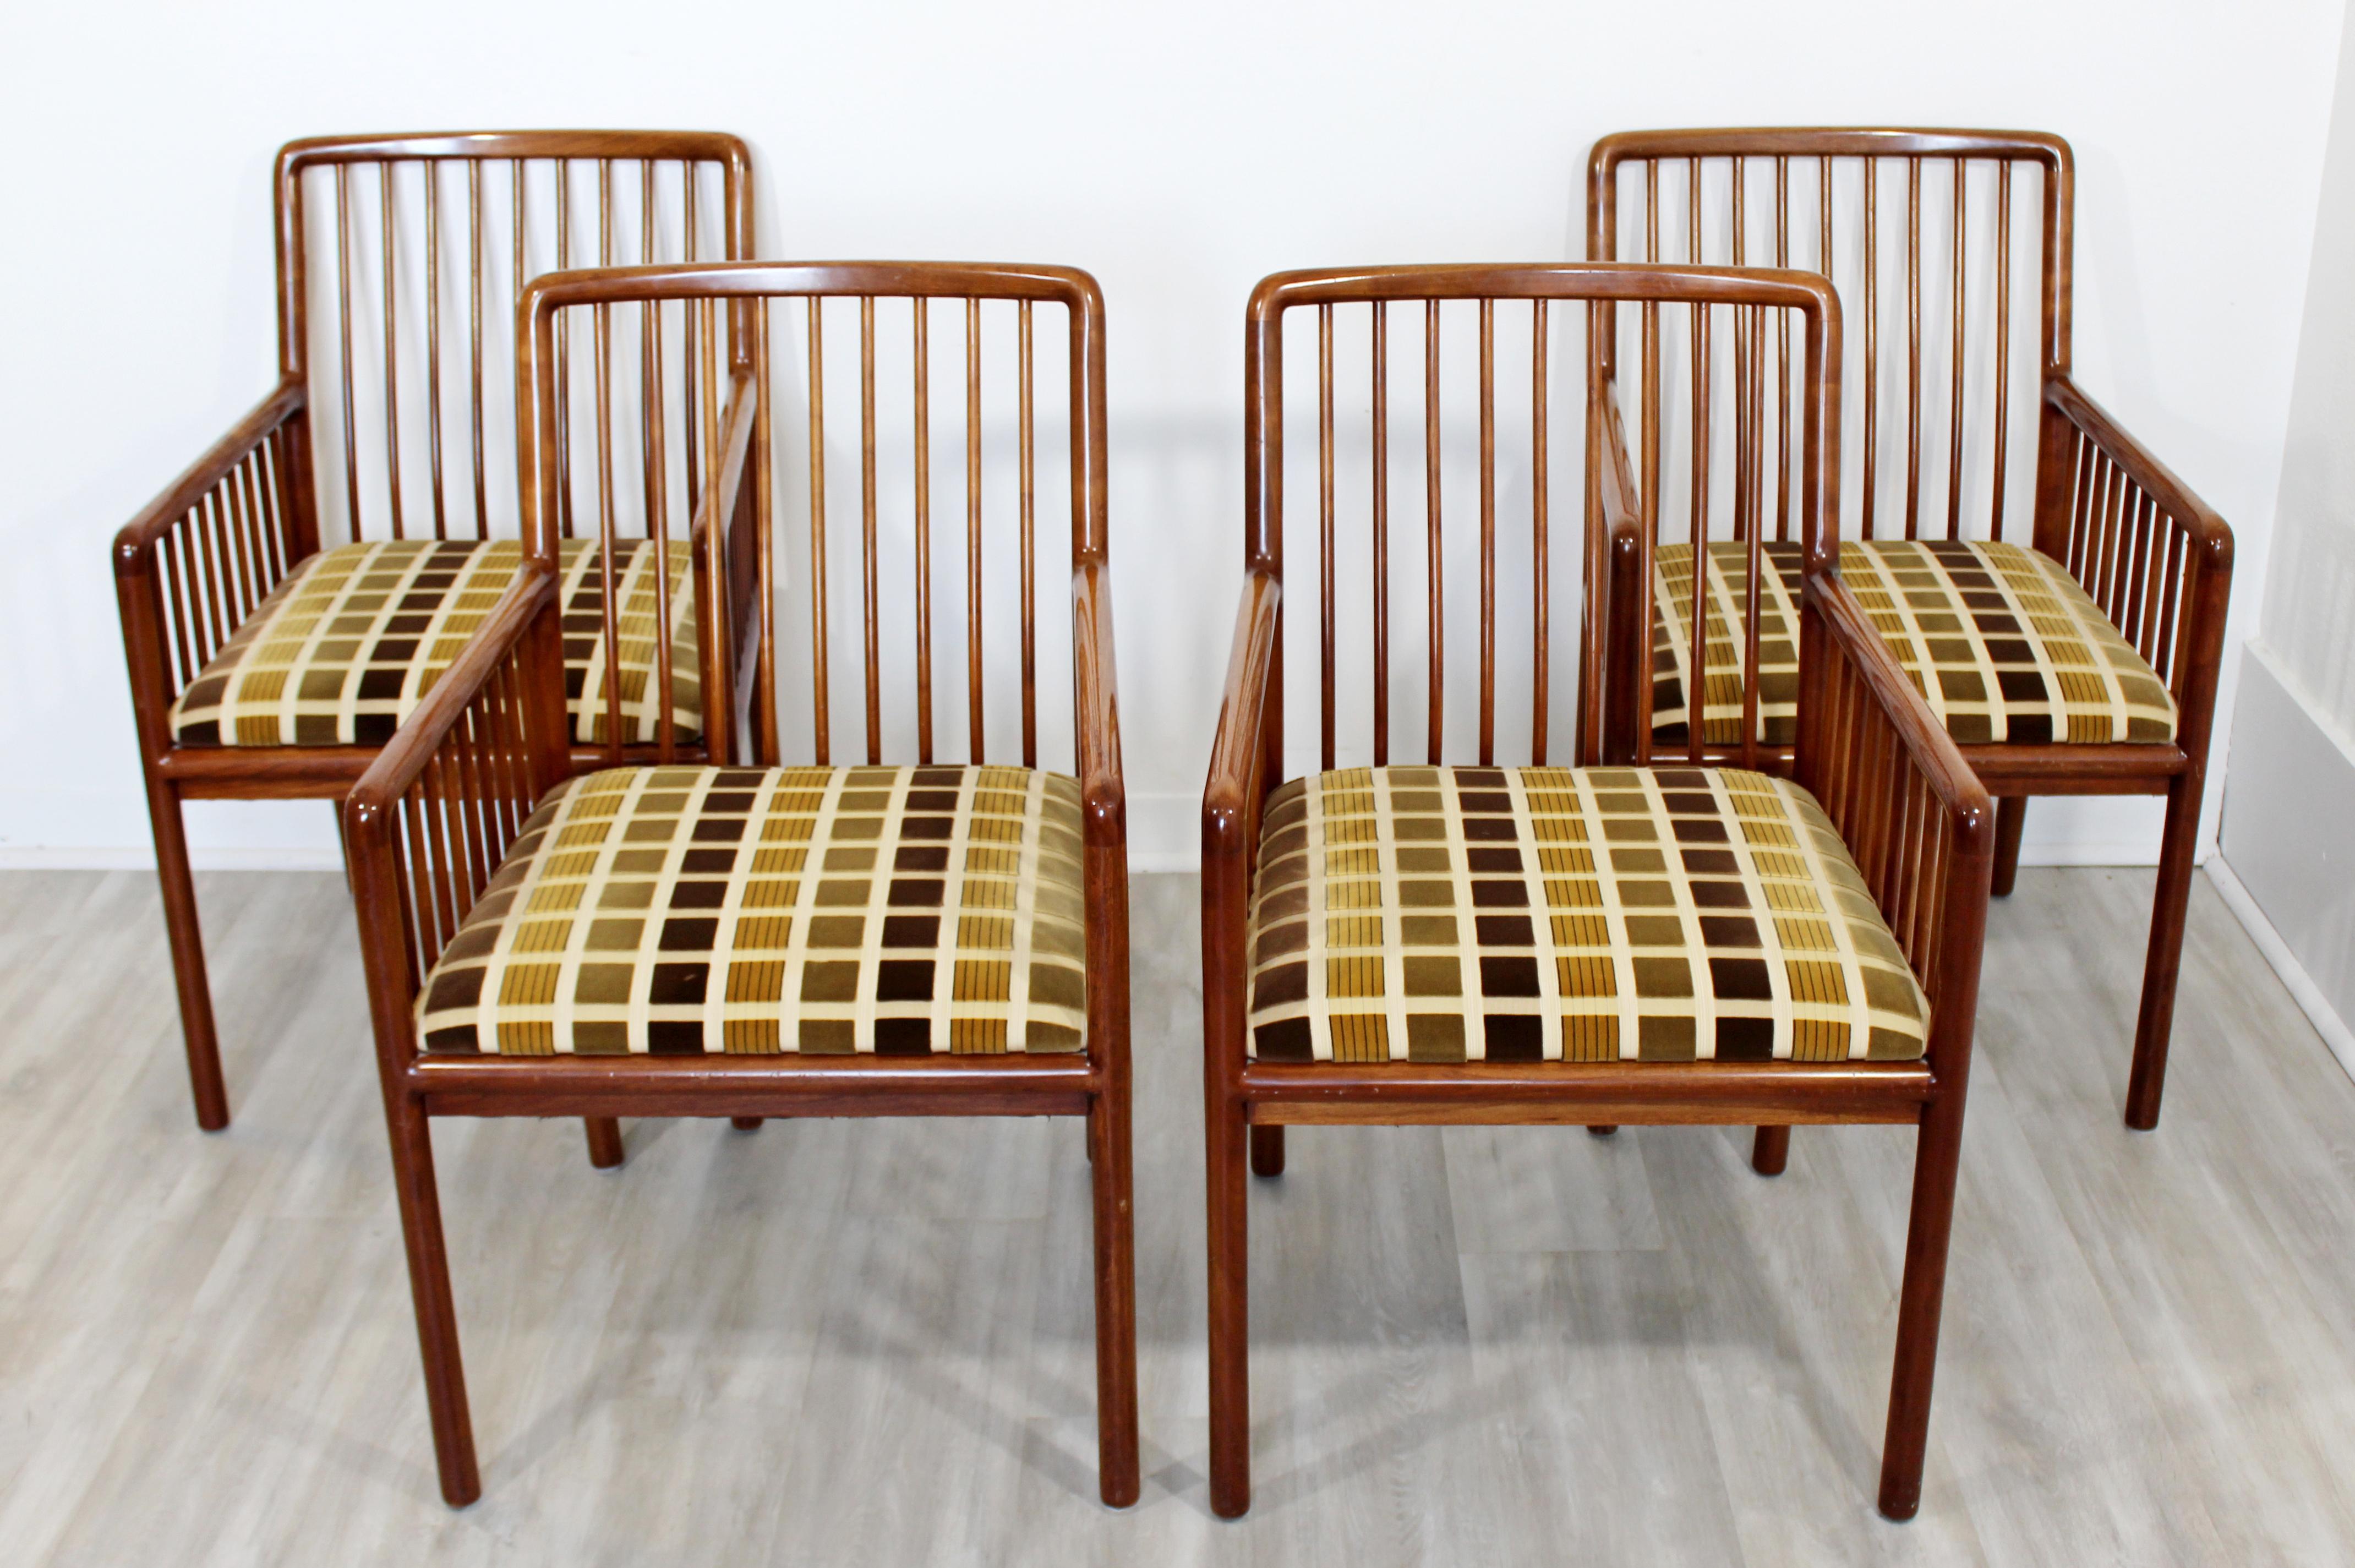 For your consideration is a charming, custom set of four, cherrywood, spindle backed side chairs by Brickell Associates, circa 1970s. In excellent vintage condition, with some very minor wear to the fabric. The dimensions are 24